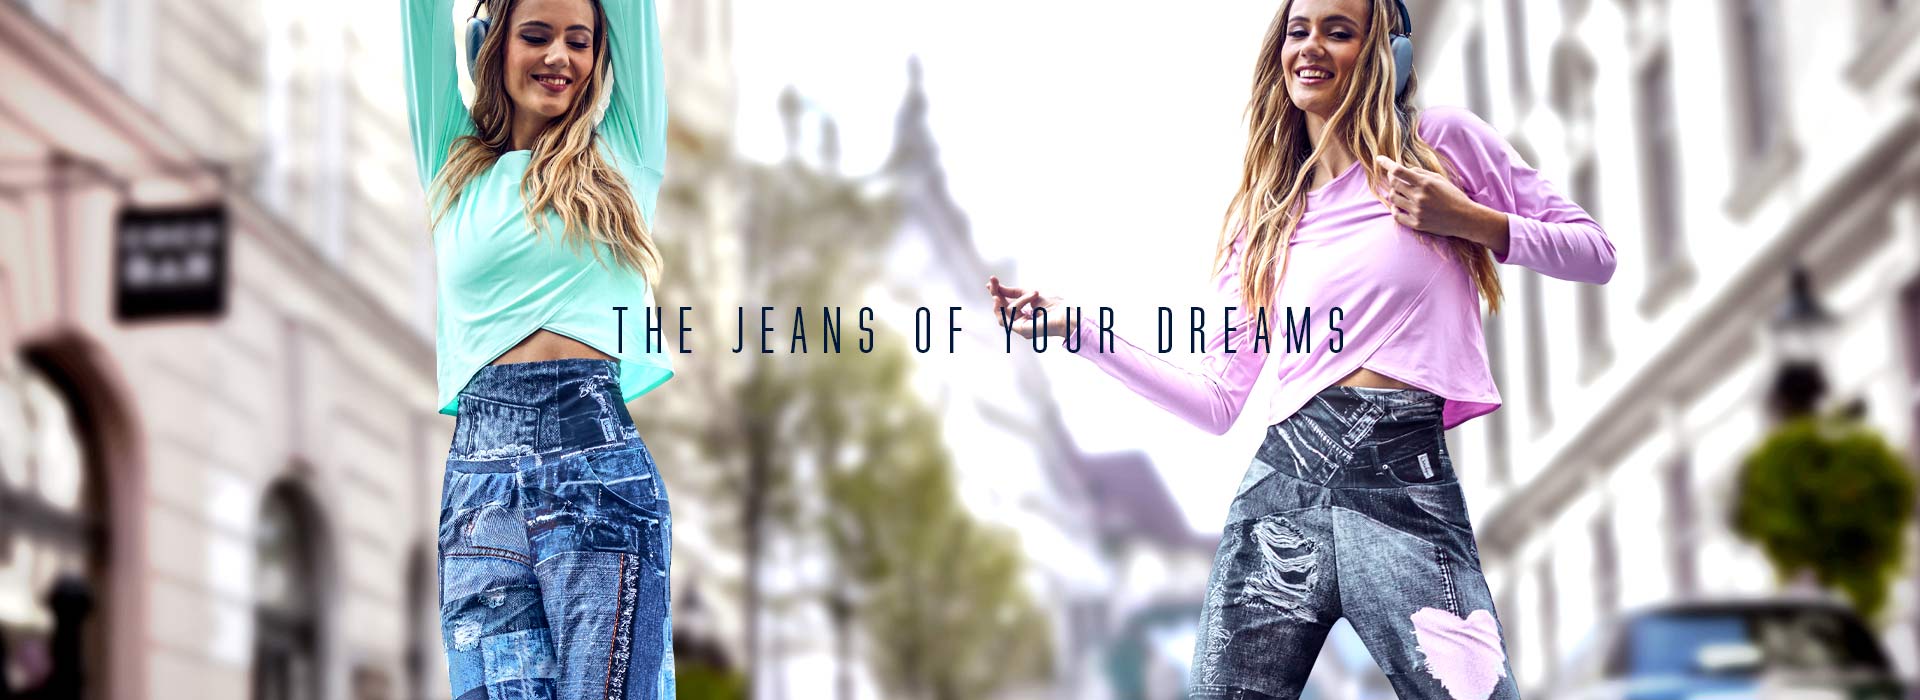 The Jeans of your Dreams Collection